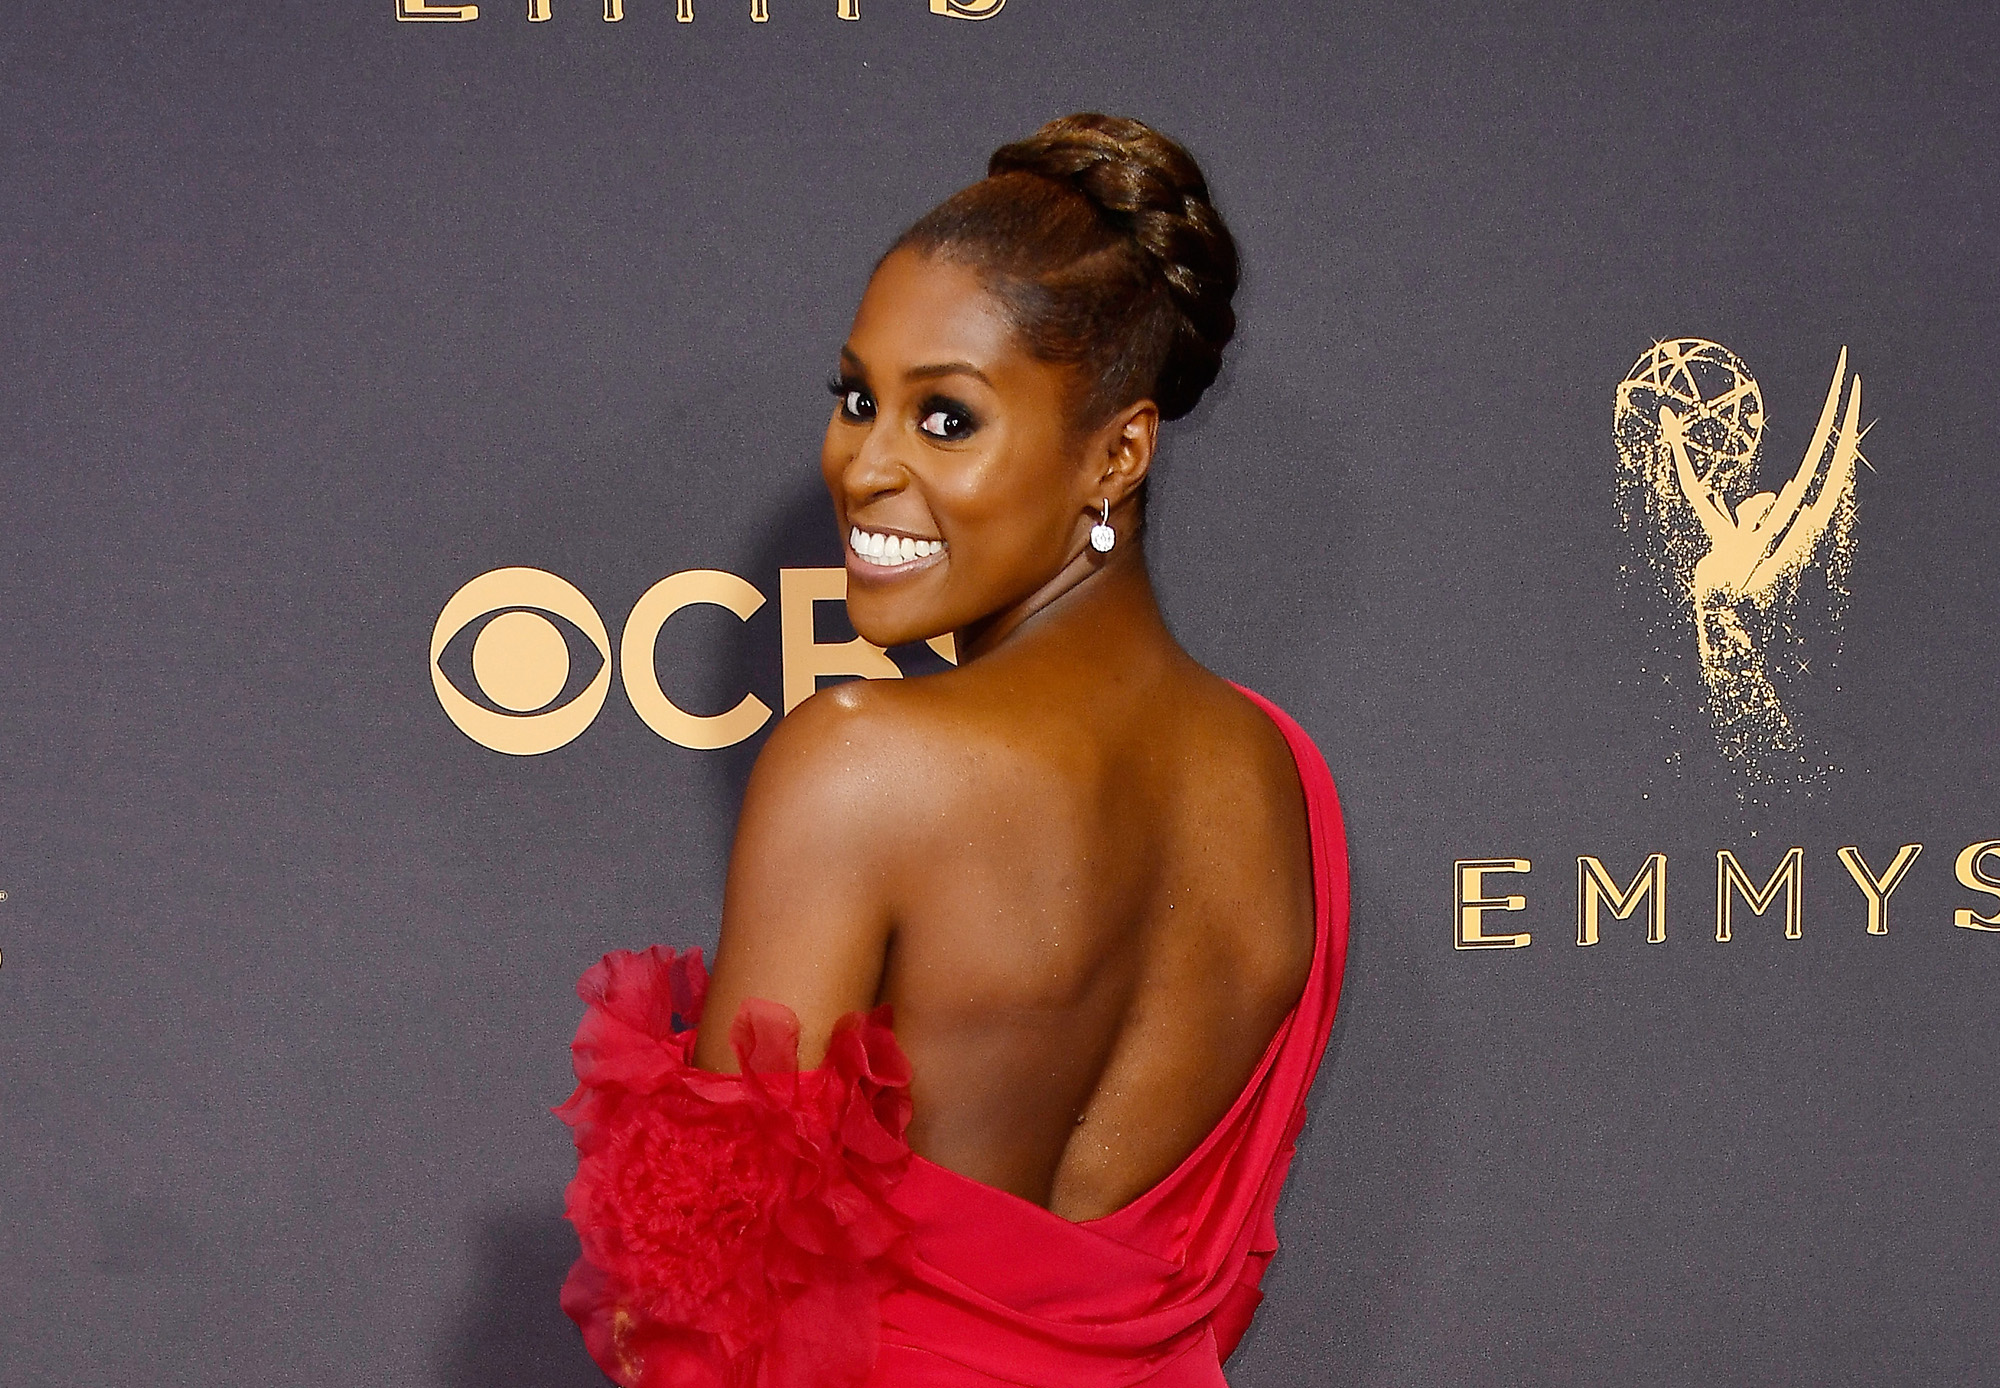 LOS ANGELES, CA - SEPTEMBER 17: Actor Issa Rae attends the 69th Annual Primetime Emmy Awards at Microsoft Theater on September 17, 2017 in Los Angeles, California.  (Photo by Frazer Harrison/Getty Images) (Frazer Harrison&mdash;Getty Images)